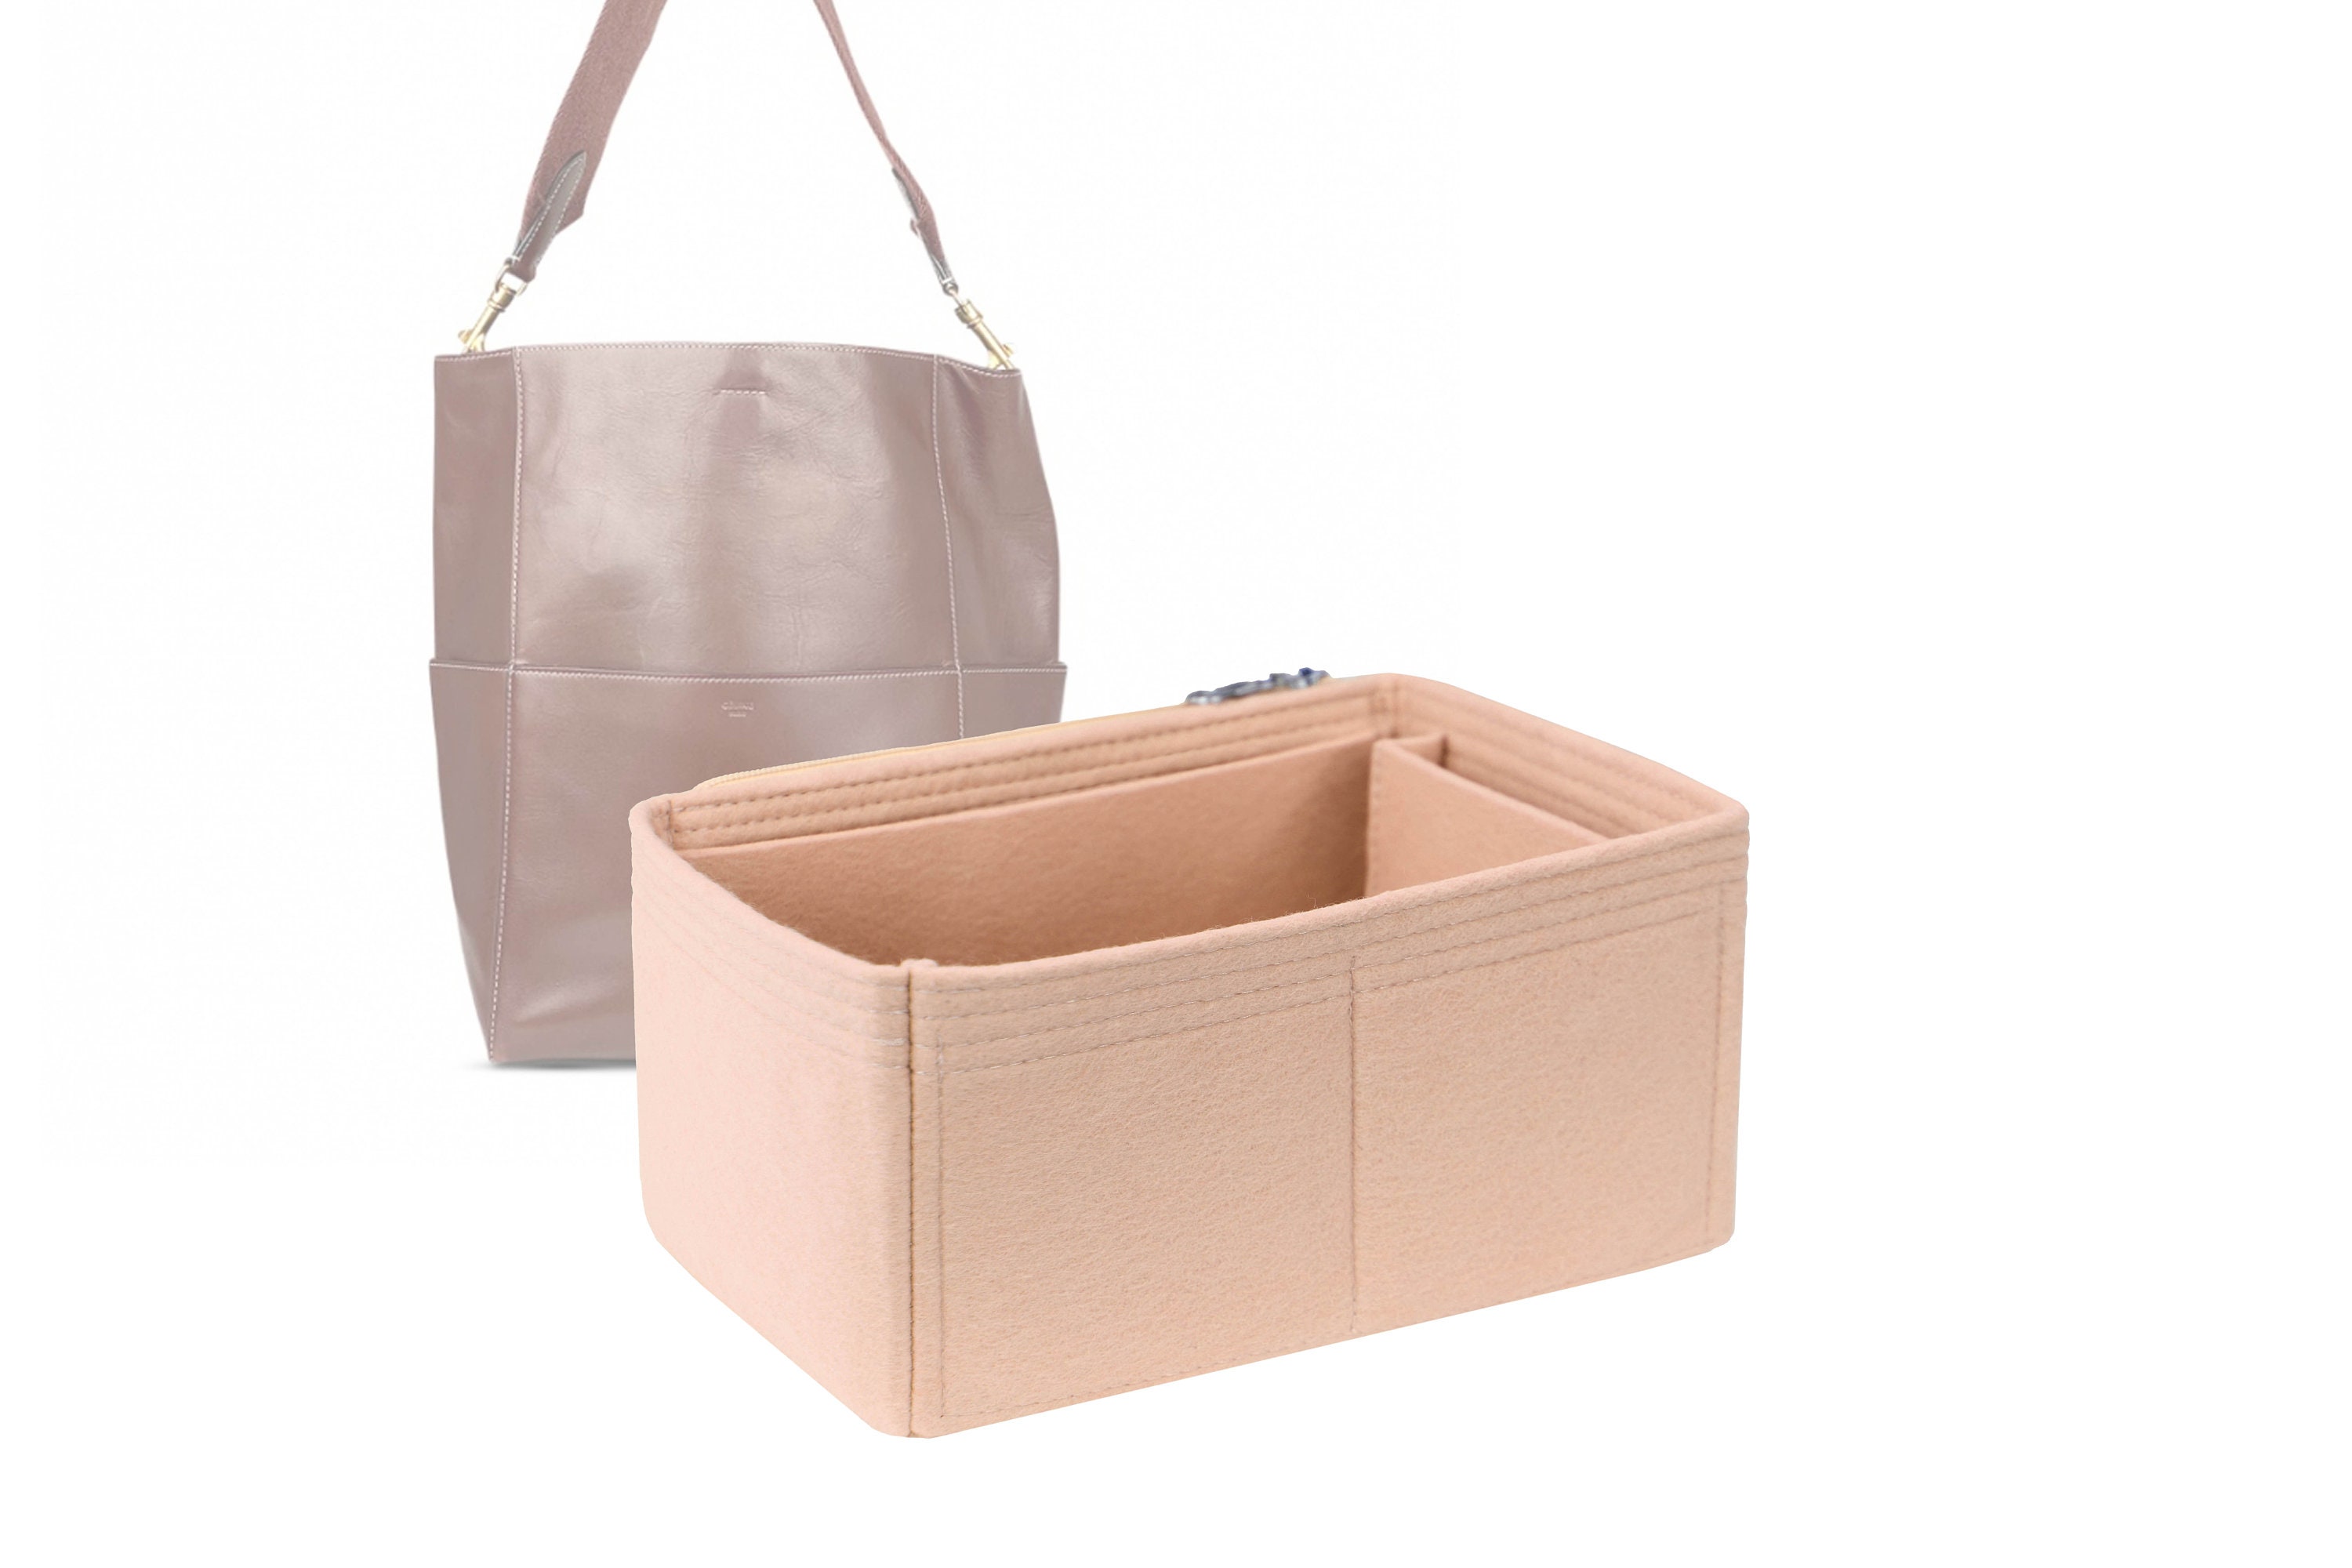 Inner Bags For Ellipse PM Felt Insert Bag Organizer Makeup Travel Purse  Portable Cosmetic Storage Tote Bag Accessories